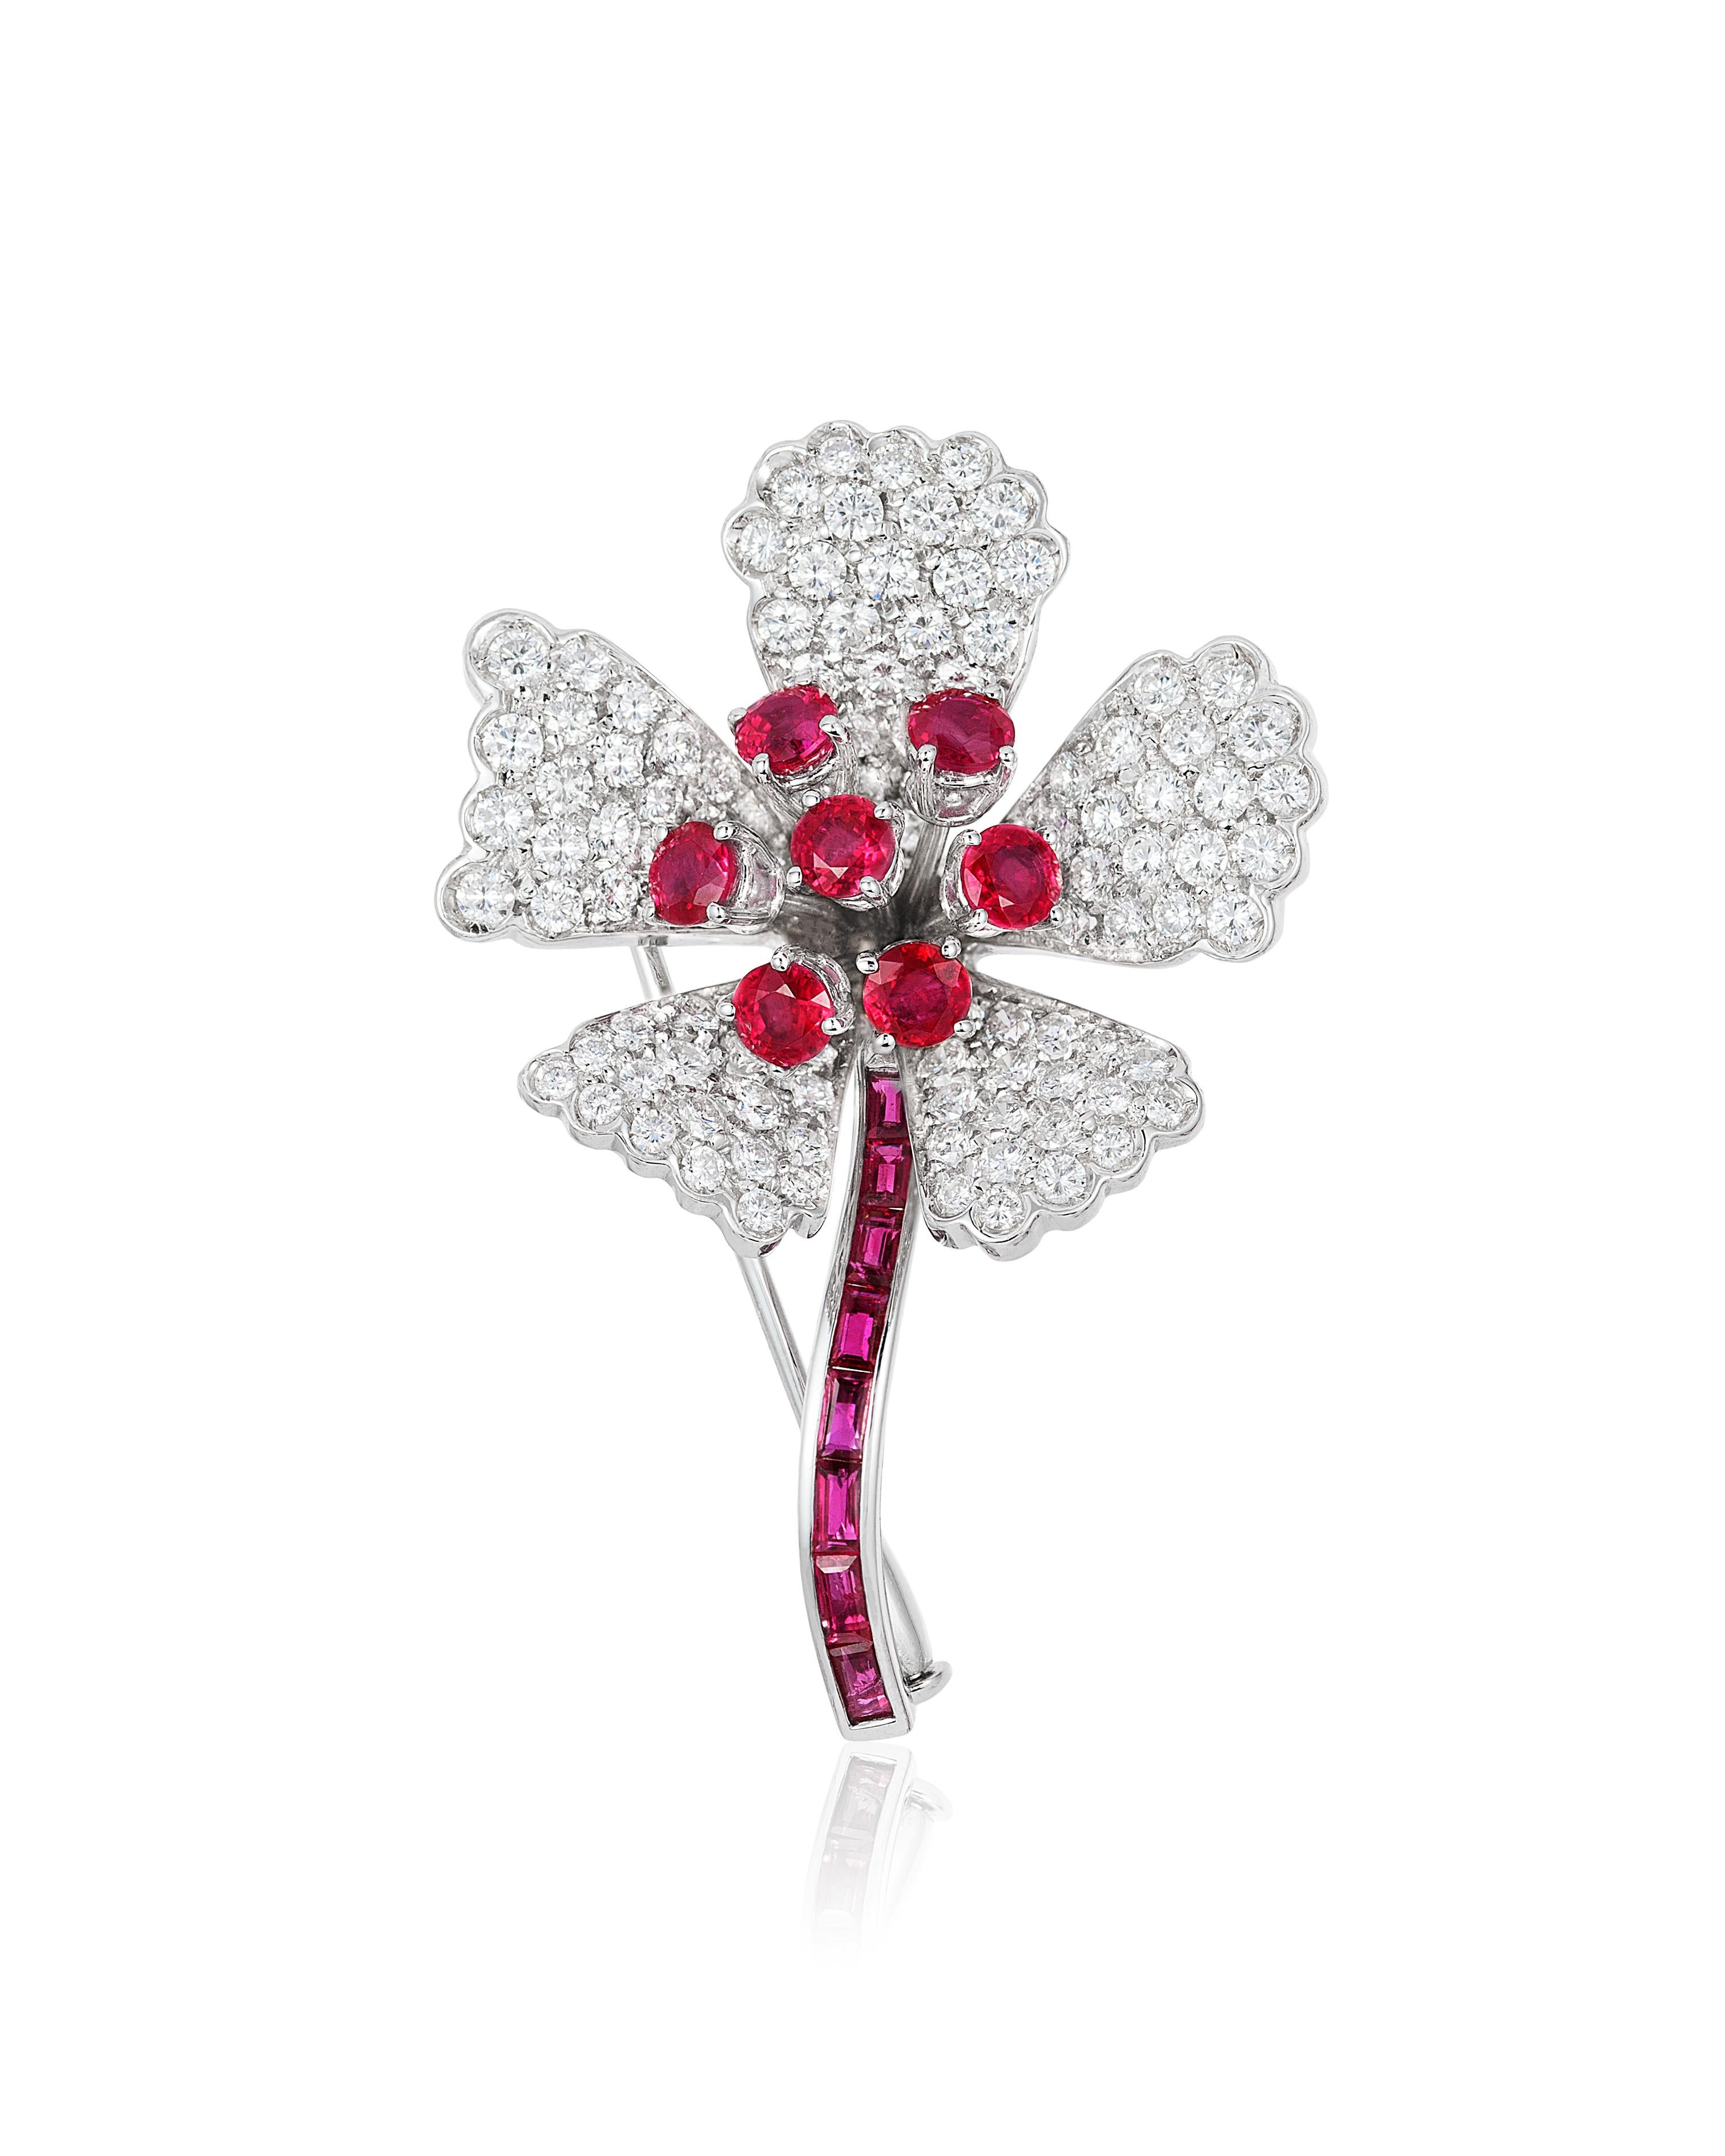 Andreoli Ruby Diamond Flower Brooch Pin 18 Karat White Gold. This brooch features fu 3.16 carat of F-G-H Color VS-SI Clarity of ideal brilliant round cut diamonds. 2.86 carats of Seven red round rubies in the center and eight invisible setting